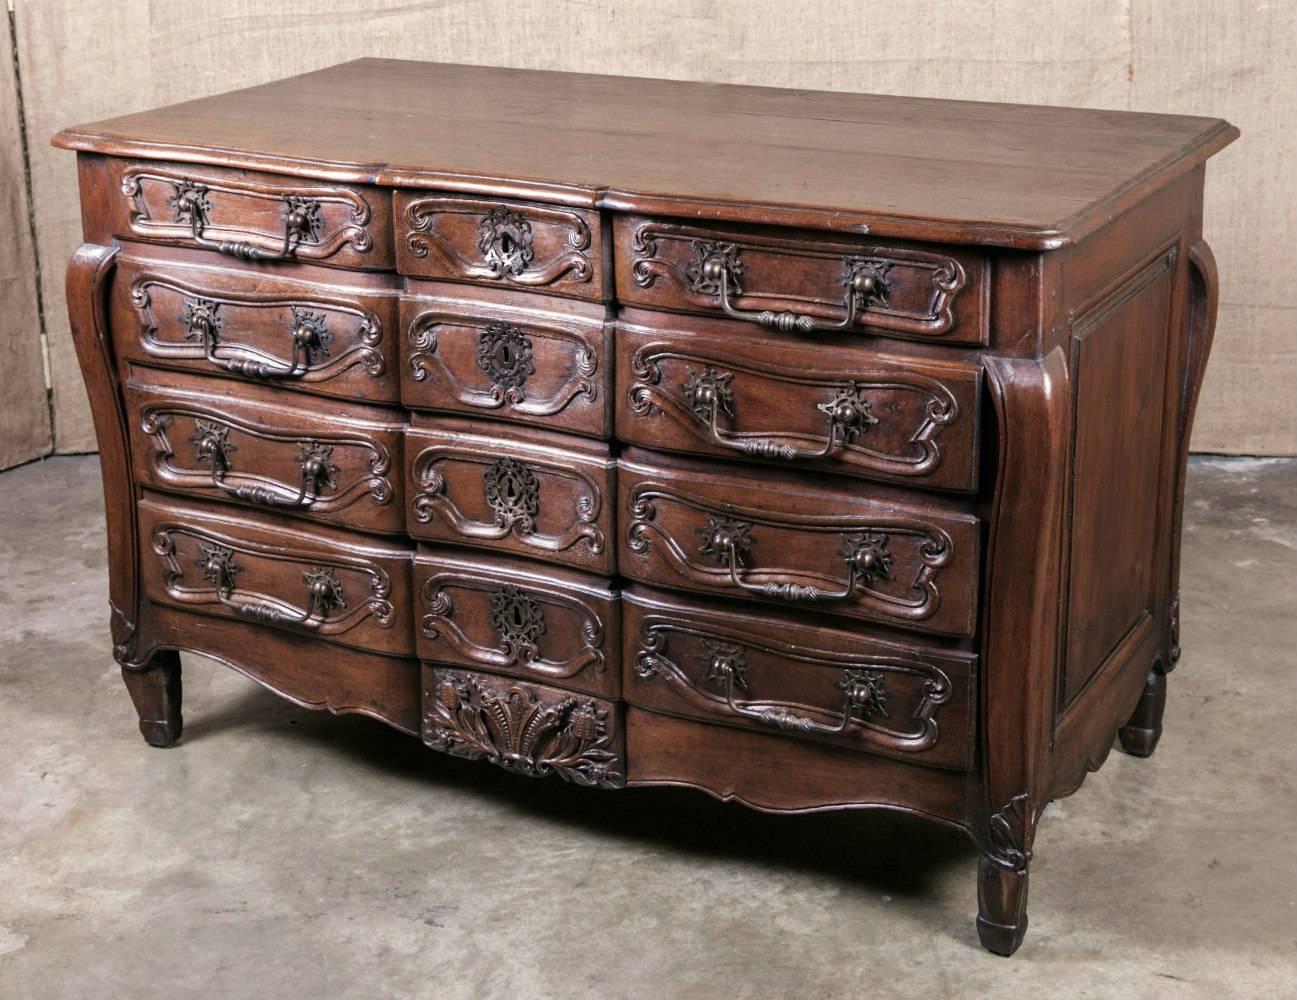 Rare 18th century period, French, Louis XV commode having three small top drawers over three single drawers with faux drawer facades. Original hand-forged iron handles and escutcheons adorn the fronts of each drawer. Sides are paneled and there are